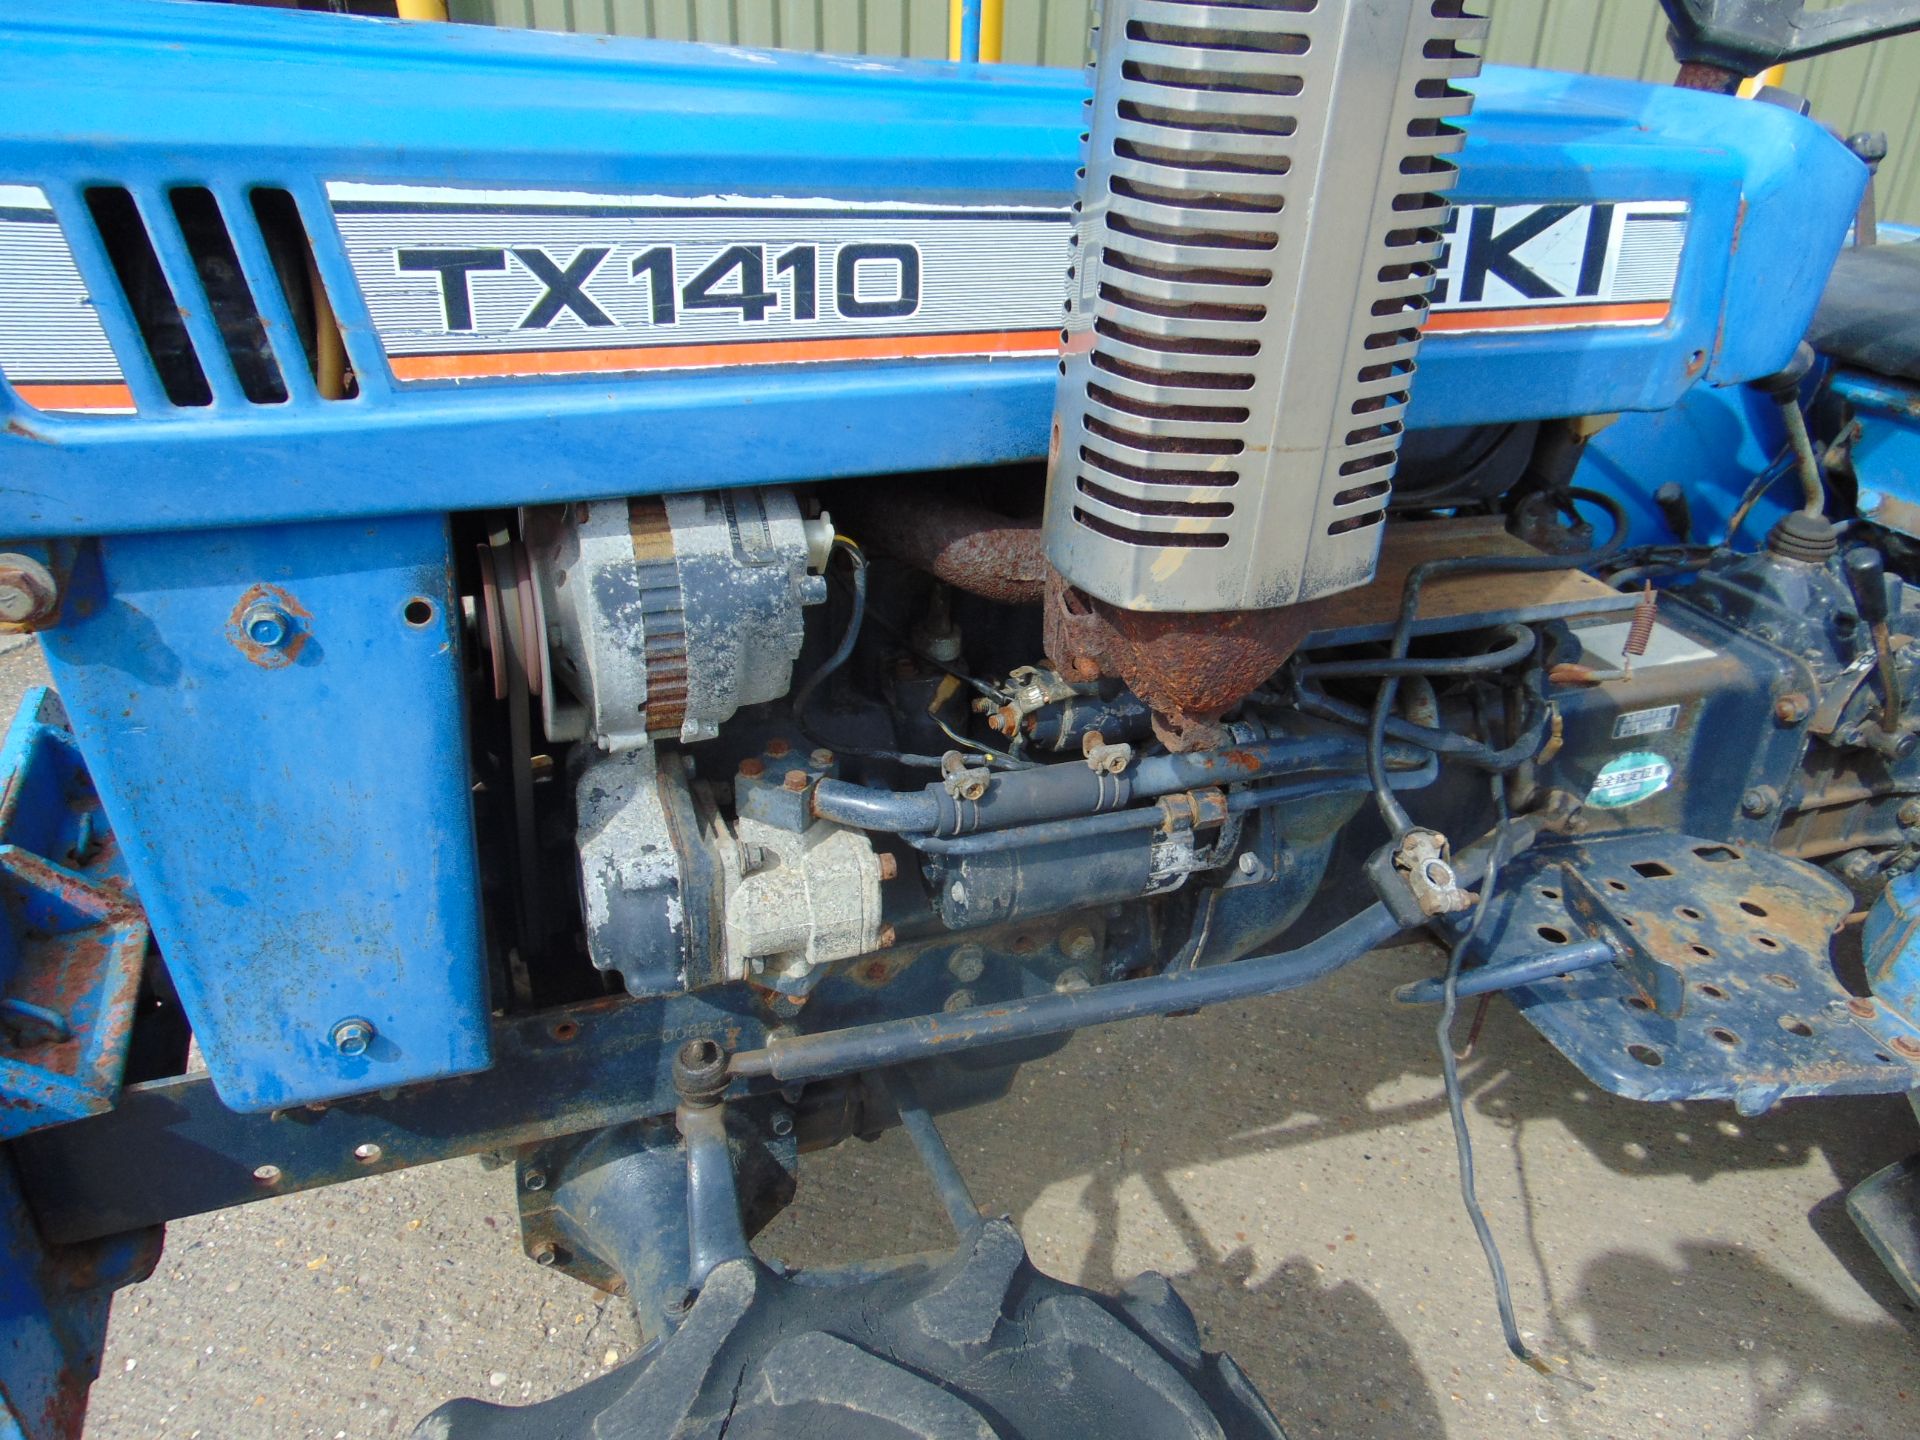 Iseki TX1410 4x4 Compact Tractor w/ Rotary Tiller - Image 20 of 24